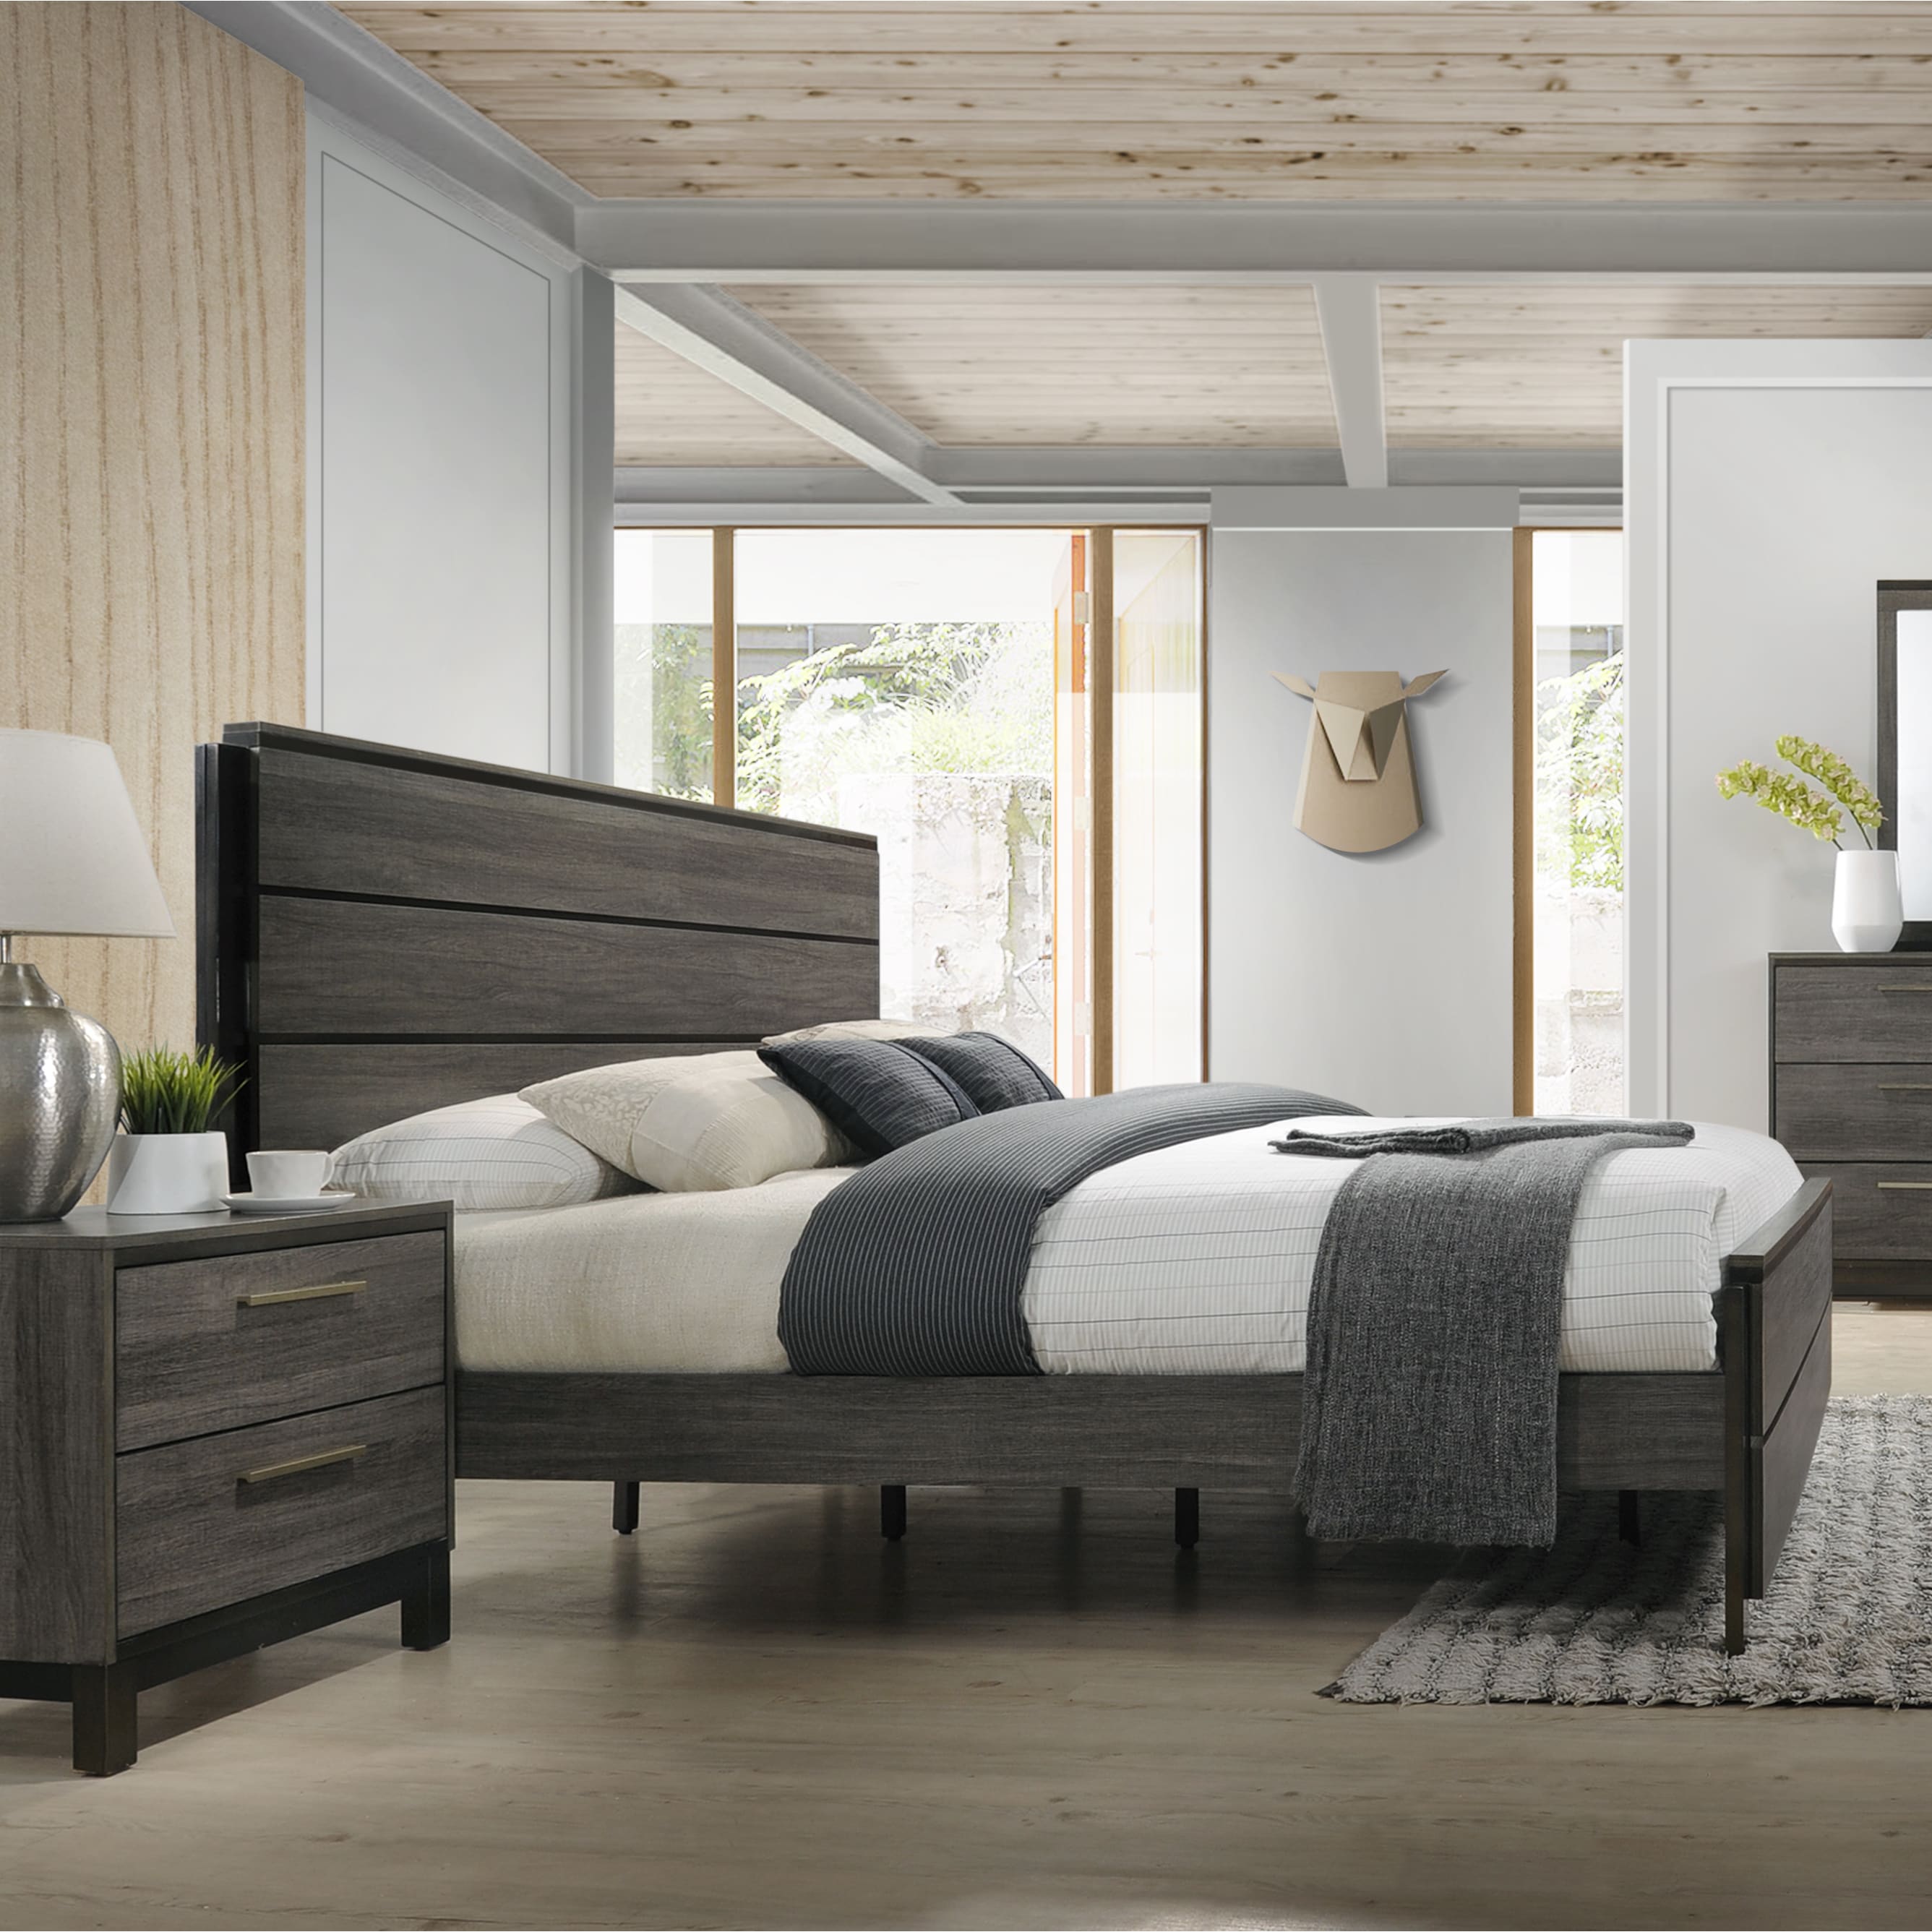 Ioana 187 Antique Grey Finish Wood King Size Bed On Sale Overstock 15018535